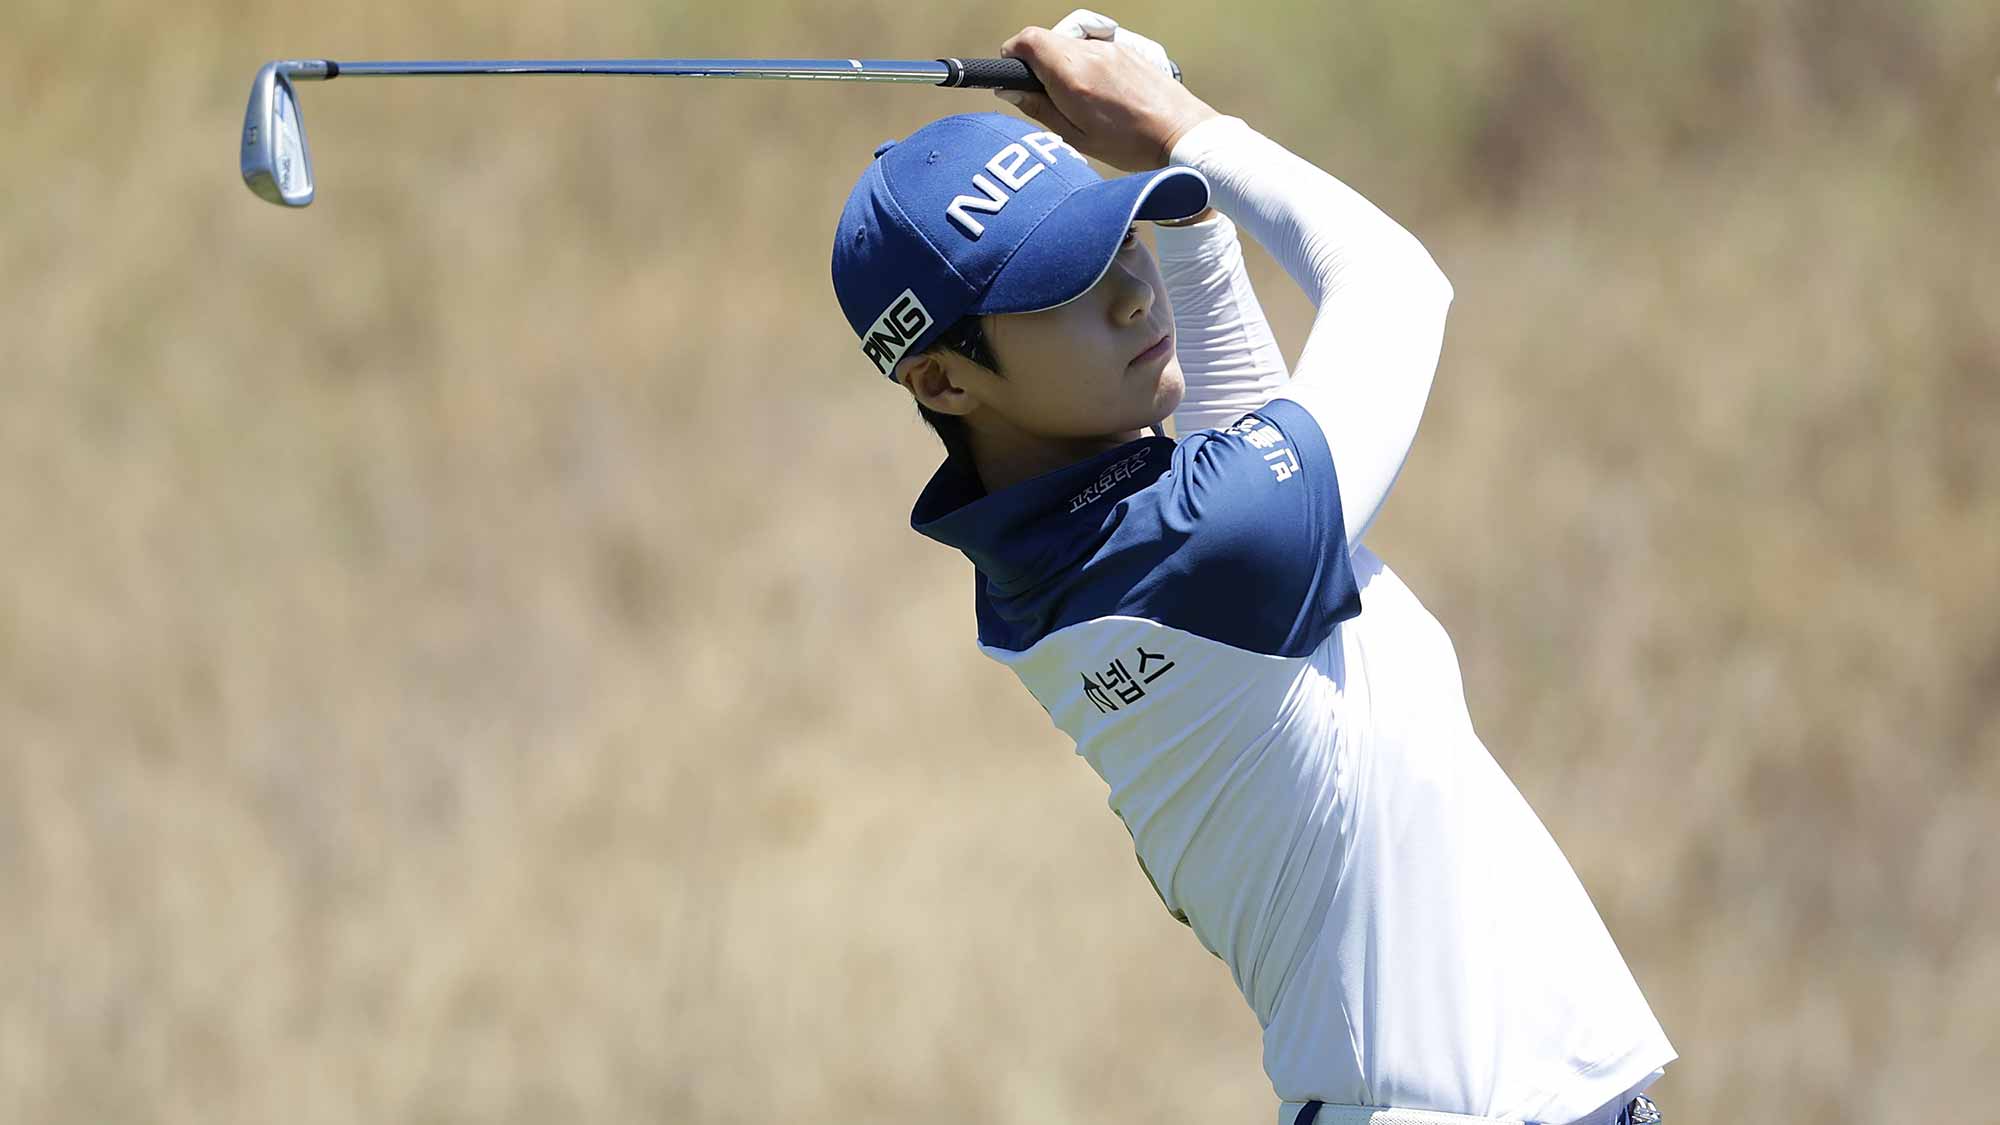 Sung Hyun Park during the third round of the U.S. Women's Open at the CordeValle Golf Club